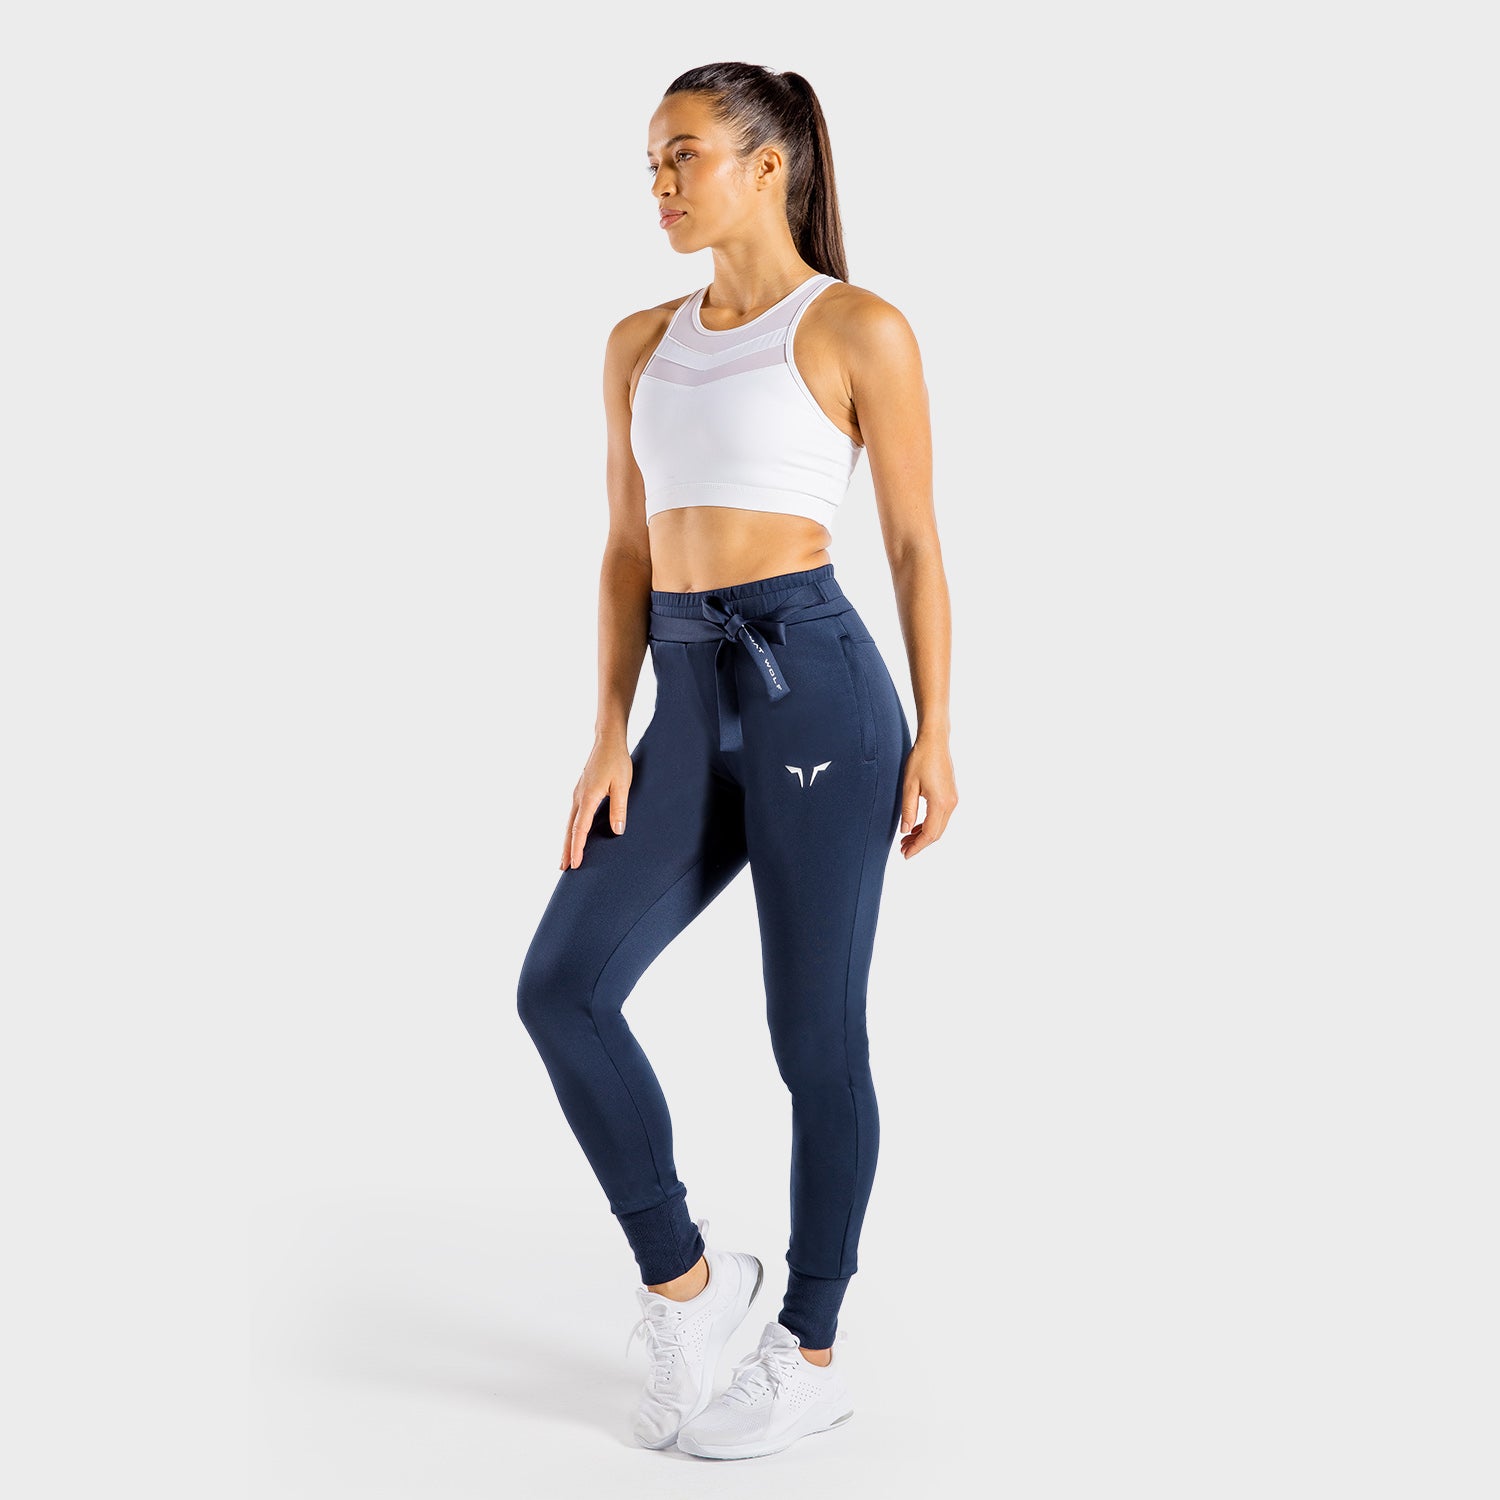 AE, She-Wolf Do-Knot-Joggers - Navy, Workout Pants Women